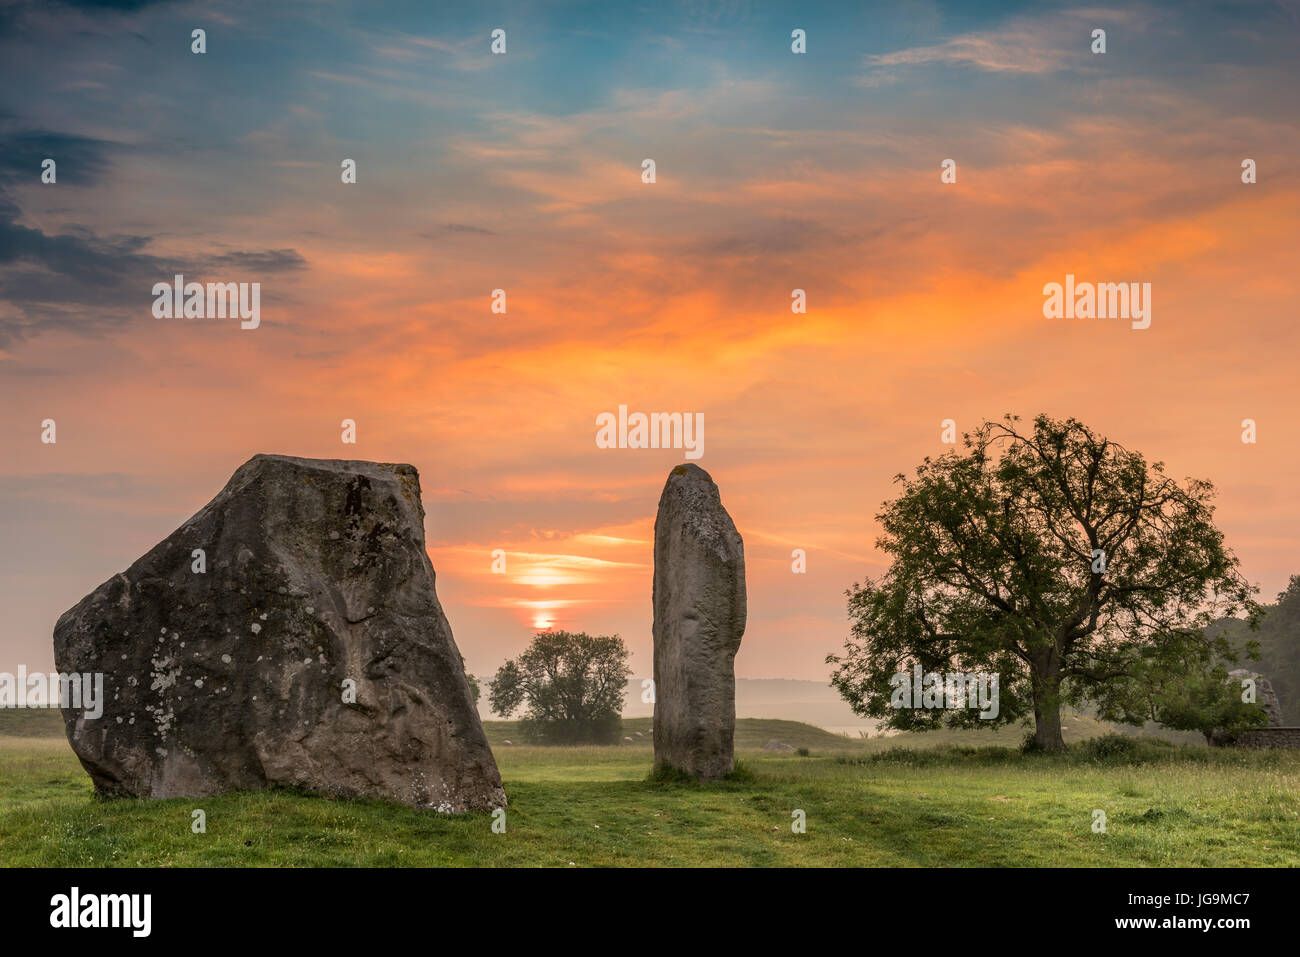 The clouds part as dawn breaks over the ancient Sarsen Stones at Avebury in Wiltshire on the day before the Summer Solstice. Stock Photo